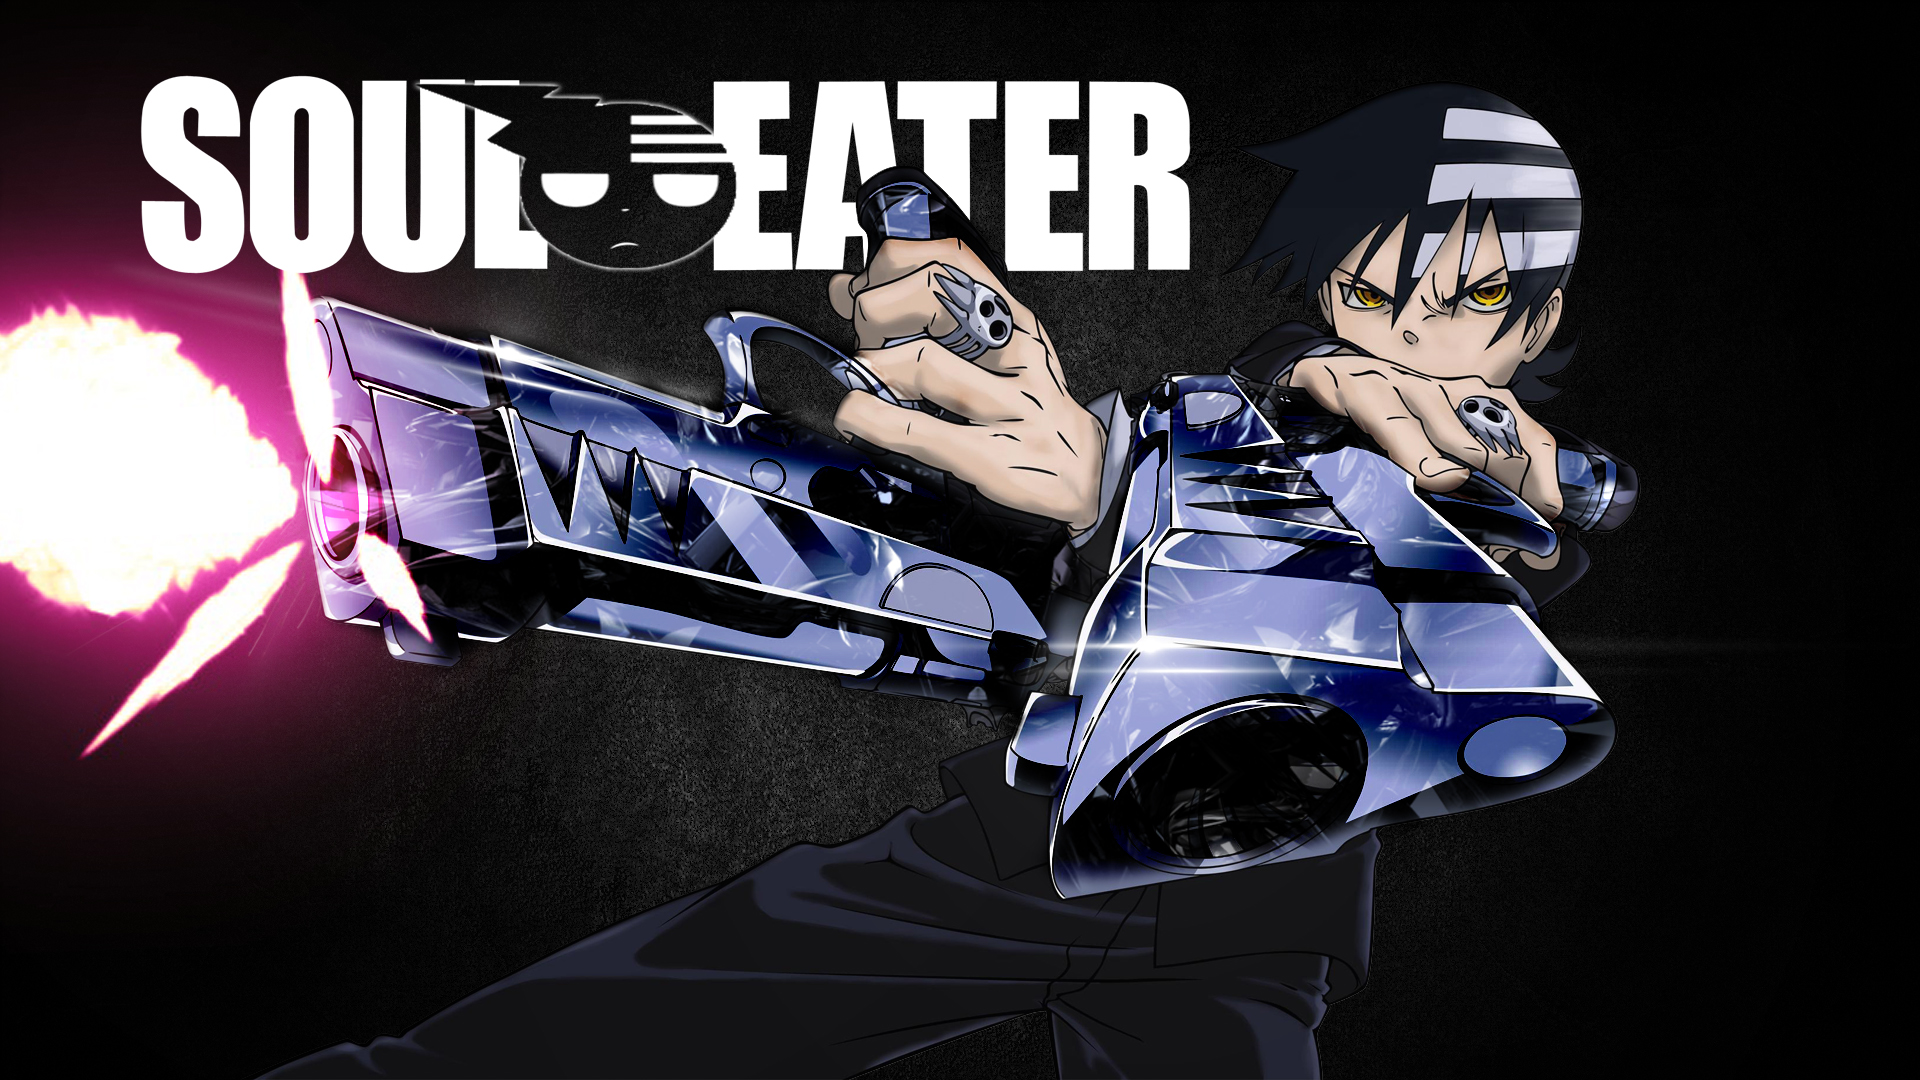 Soul Eater Death The Kid wallpaper by Supery64 on DeviantArt